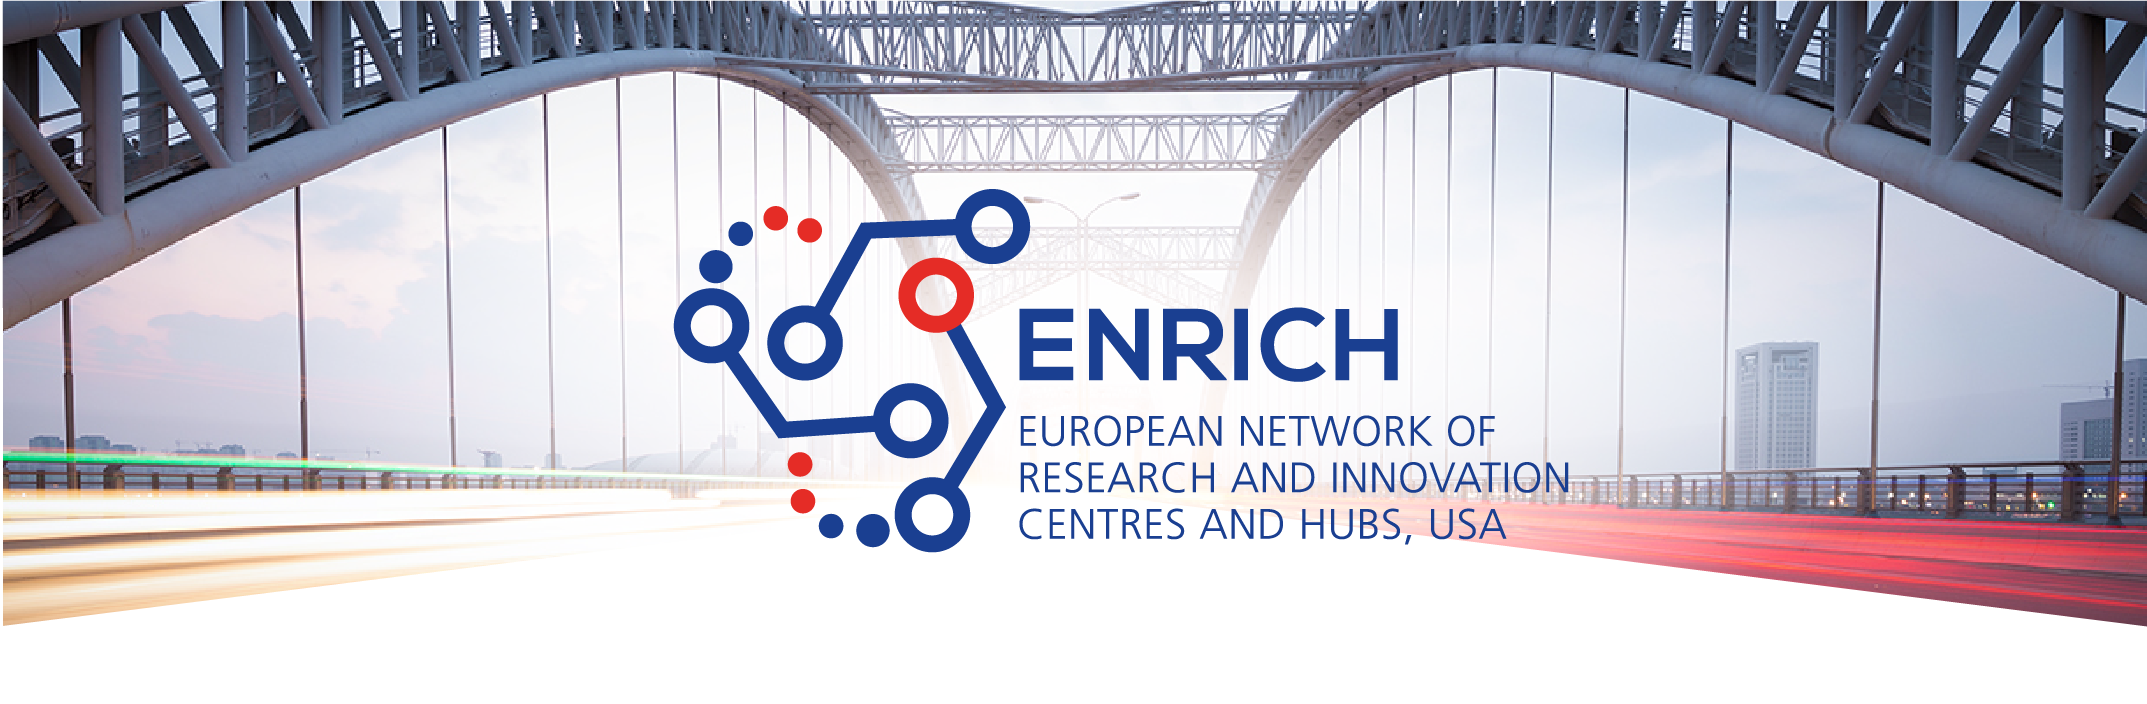 ENRICH in the USA Food and Beverage Industry Sector Focused Tour